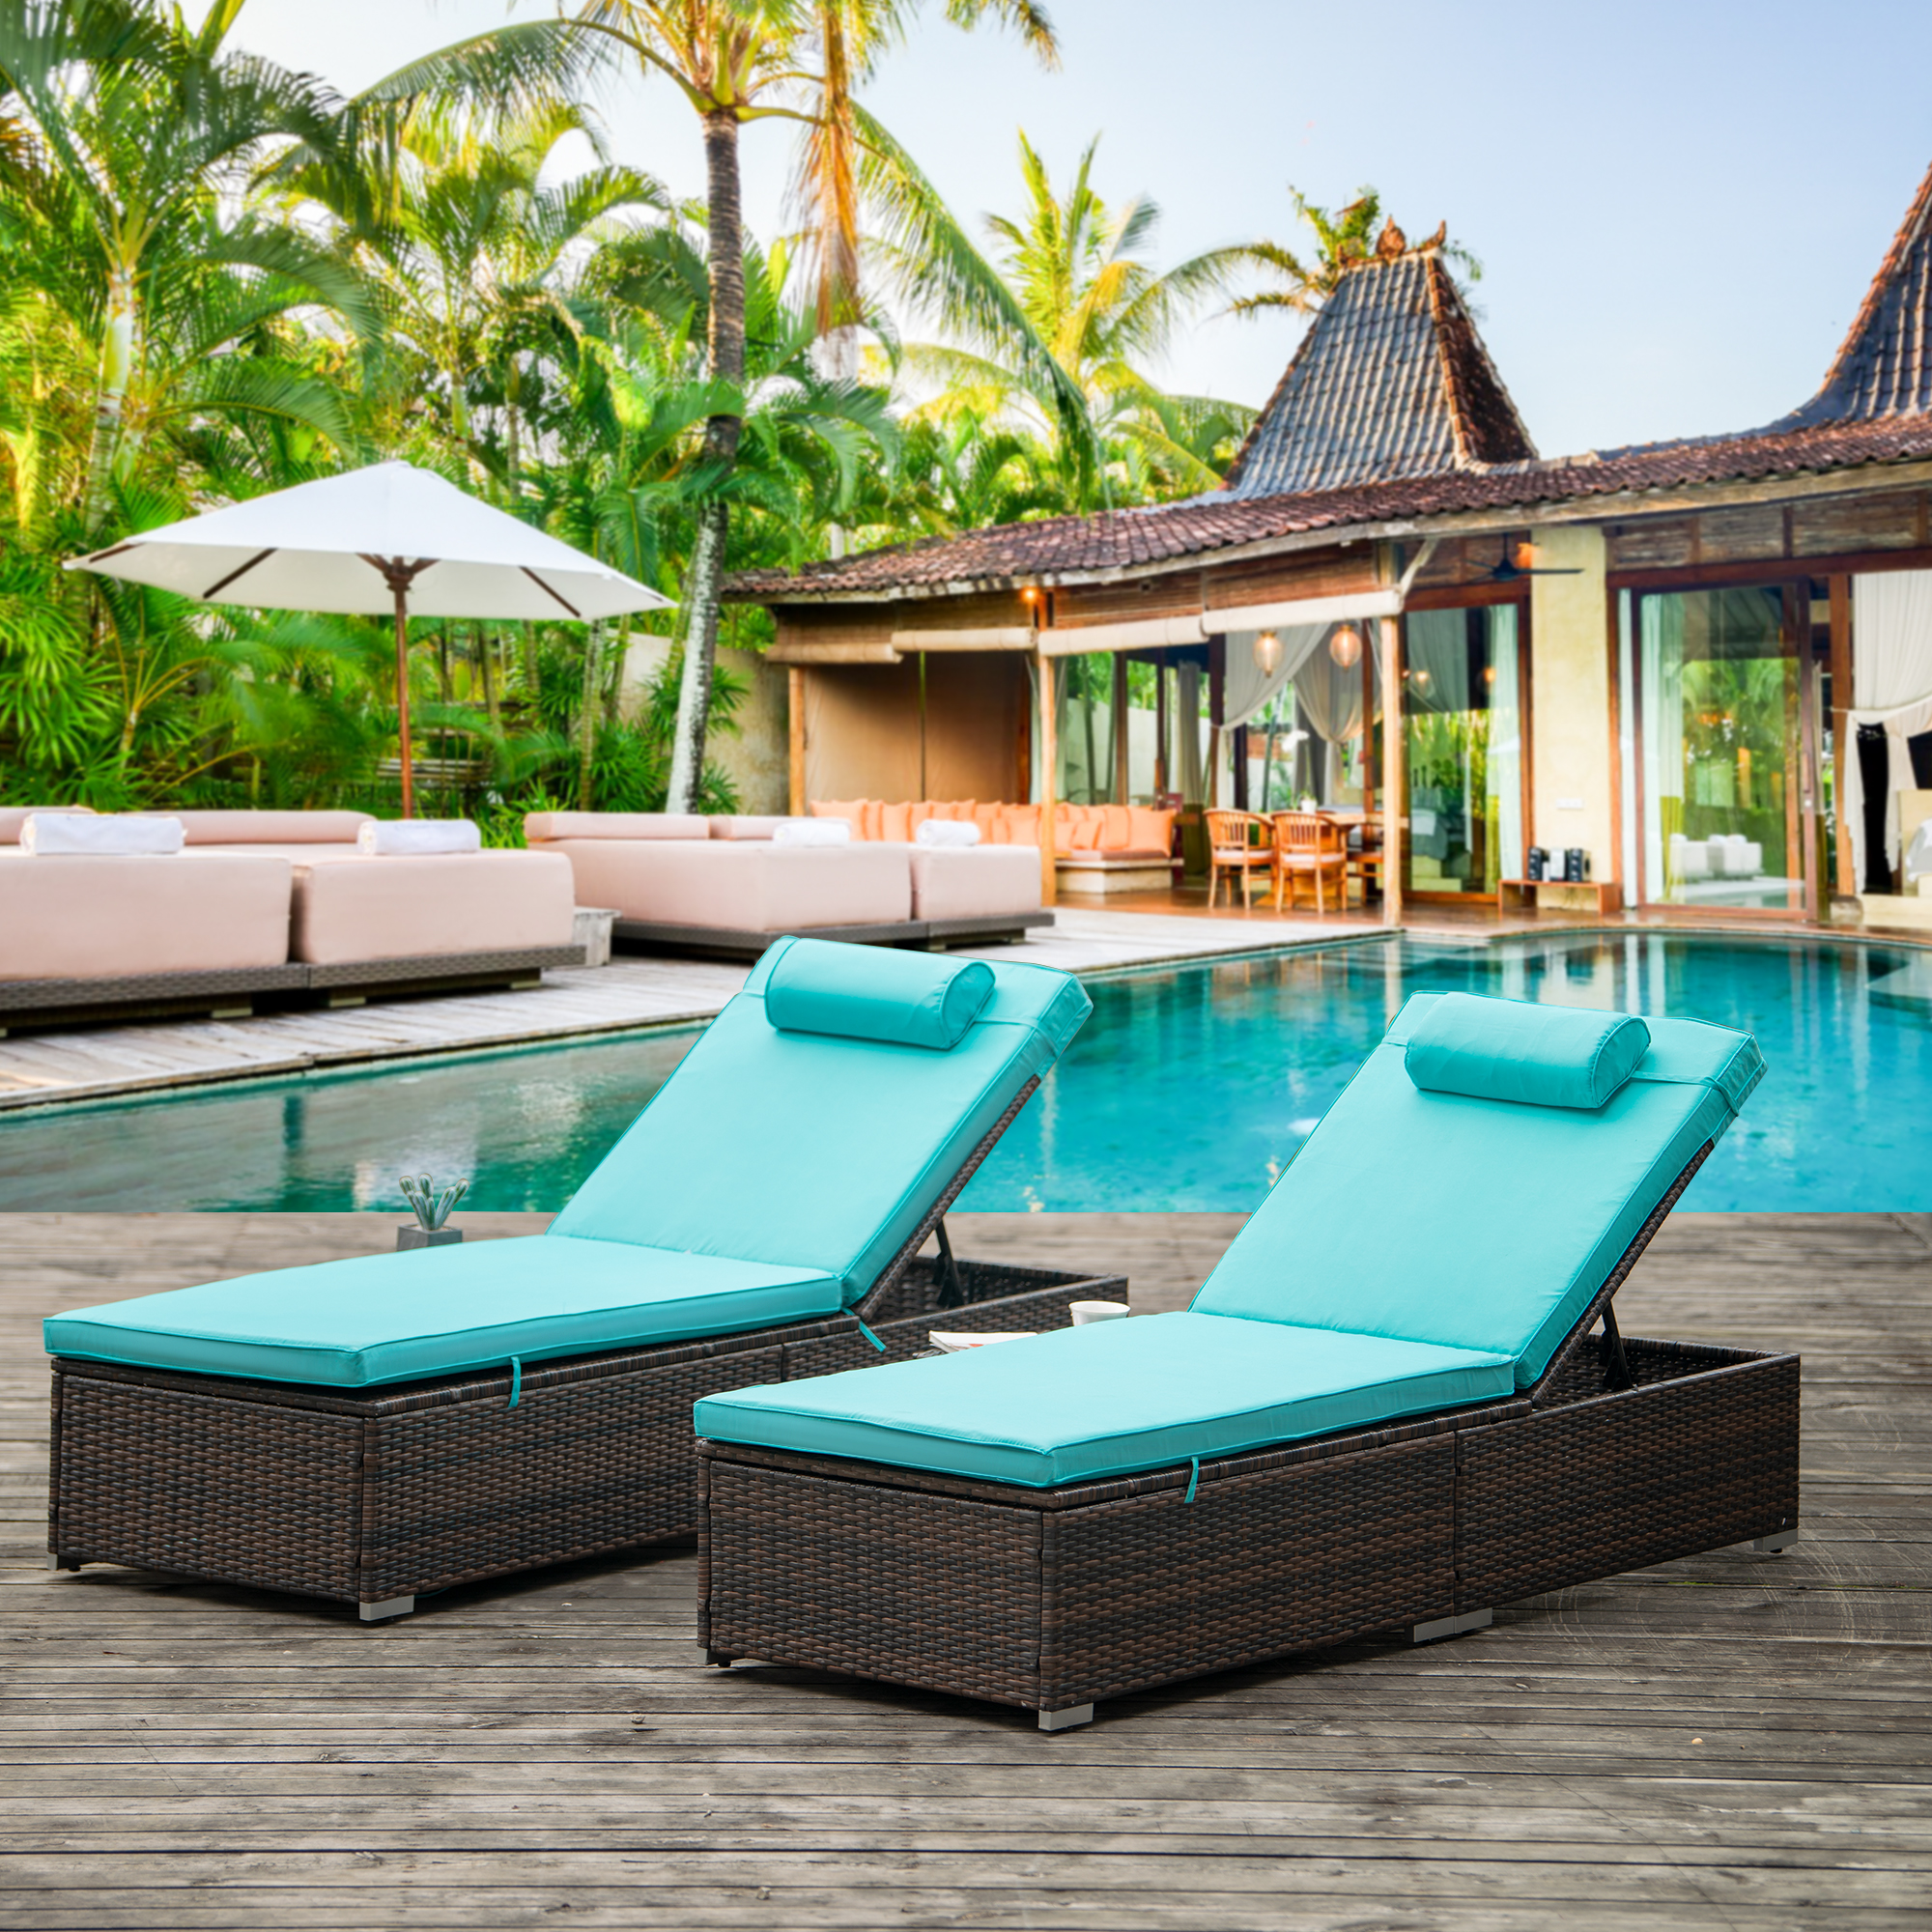 Outdoor PE Wicker Chaise Lounge - 2 Piece Patio Brown Rattan Reclining Chair Furniture Set Beach Pool Adjustable Backrest Recliners with Side Table and Comfort Head Pillow - image 1 of 7